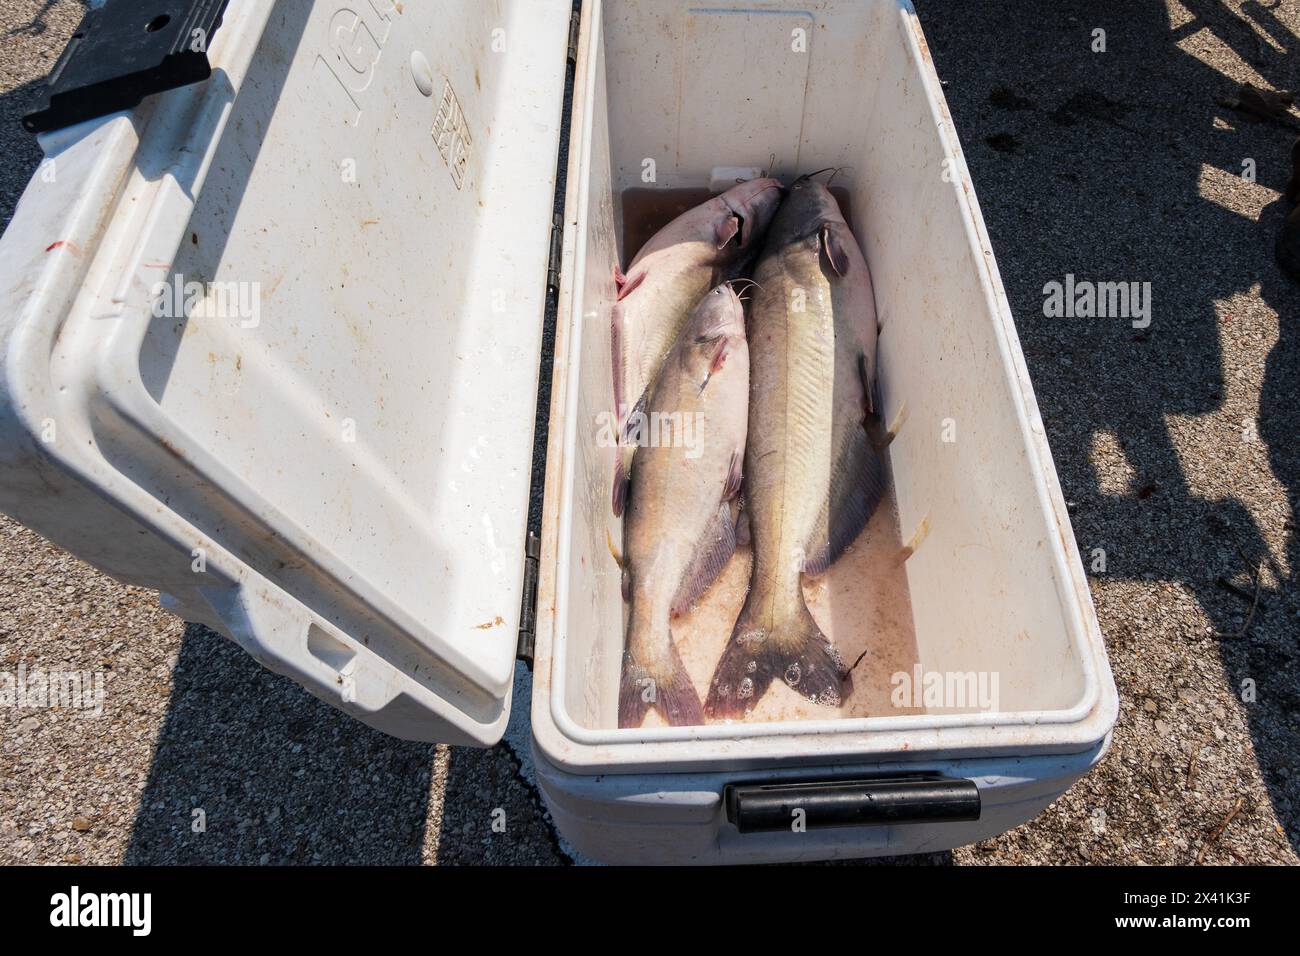 Three large Bluecat catfish, Ictalurus furcatus, resting in an ice chest ready to be cleaned and filleted after being caught in a lake. Oklahoma, USA. Stock Photo